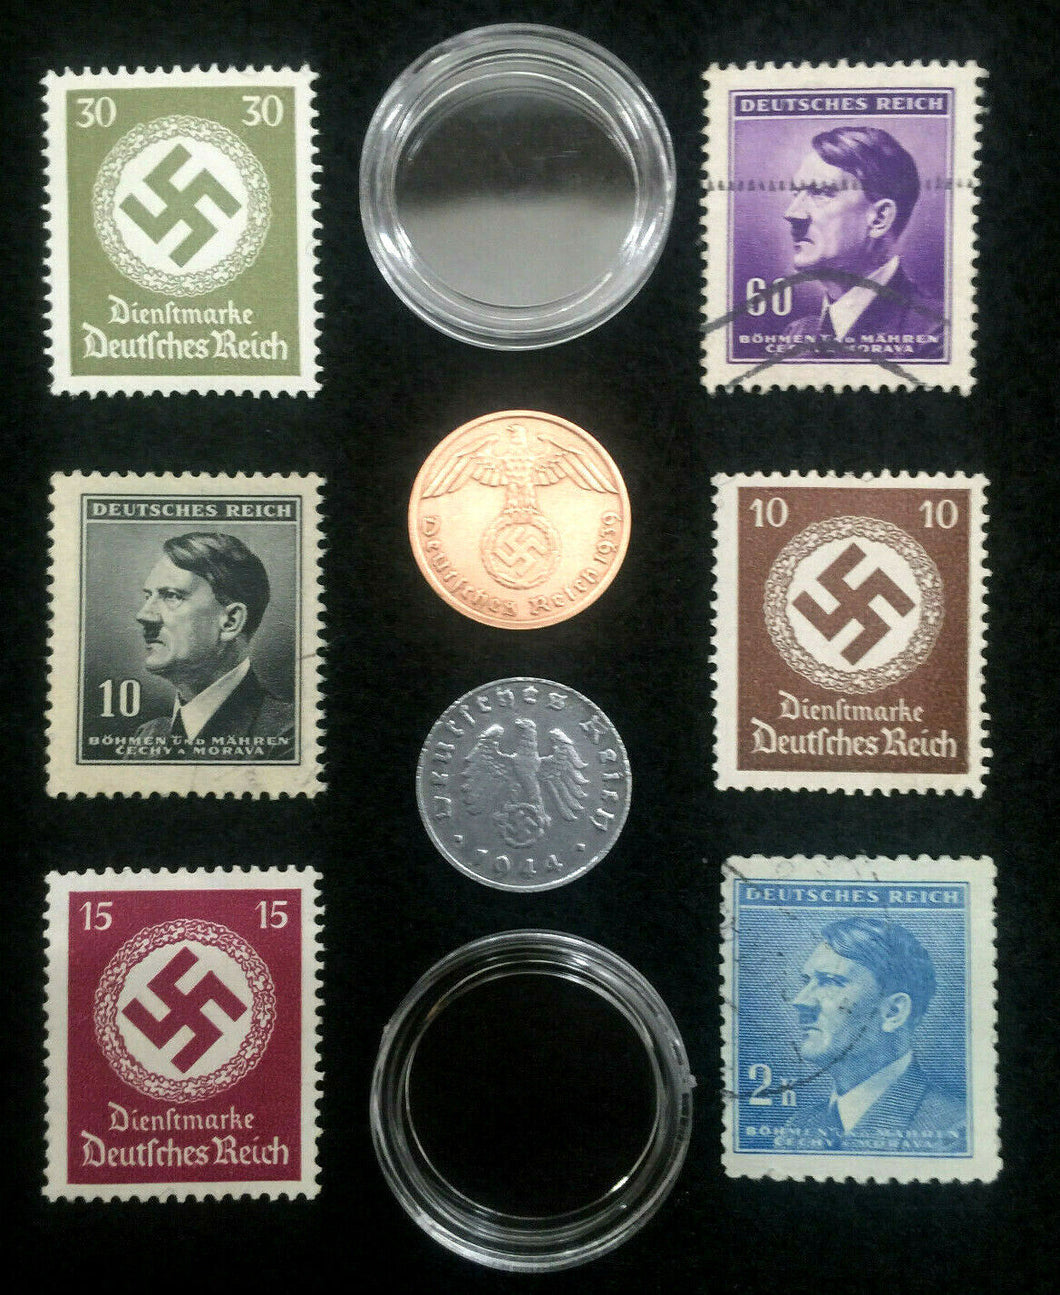 Rare WW2 German Coins & Stamps Set Of Historical Artifacts - Collectors Set